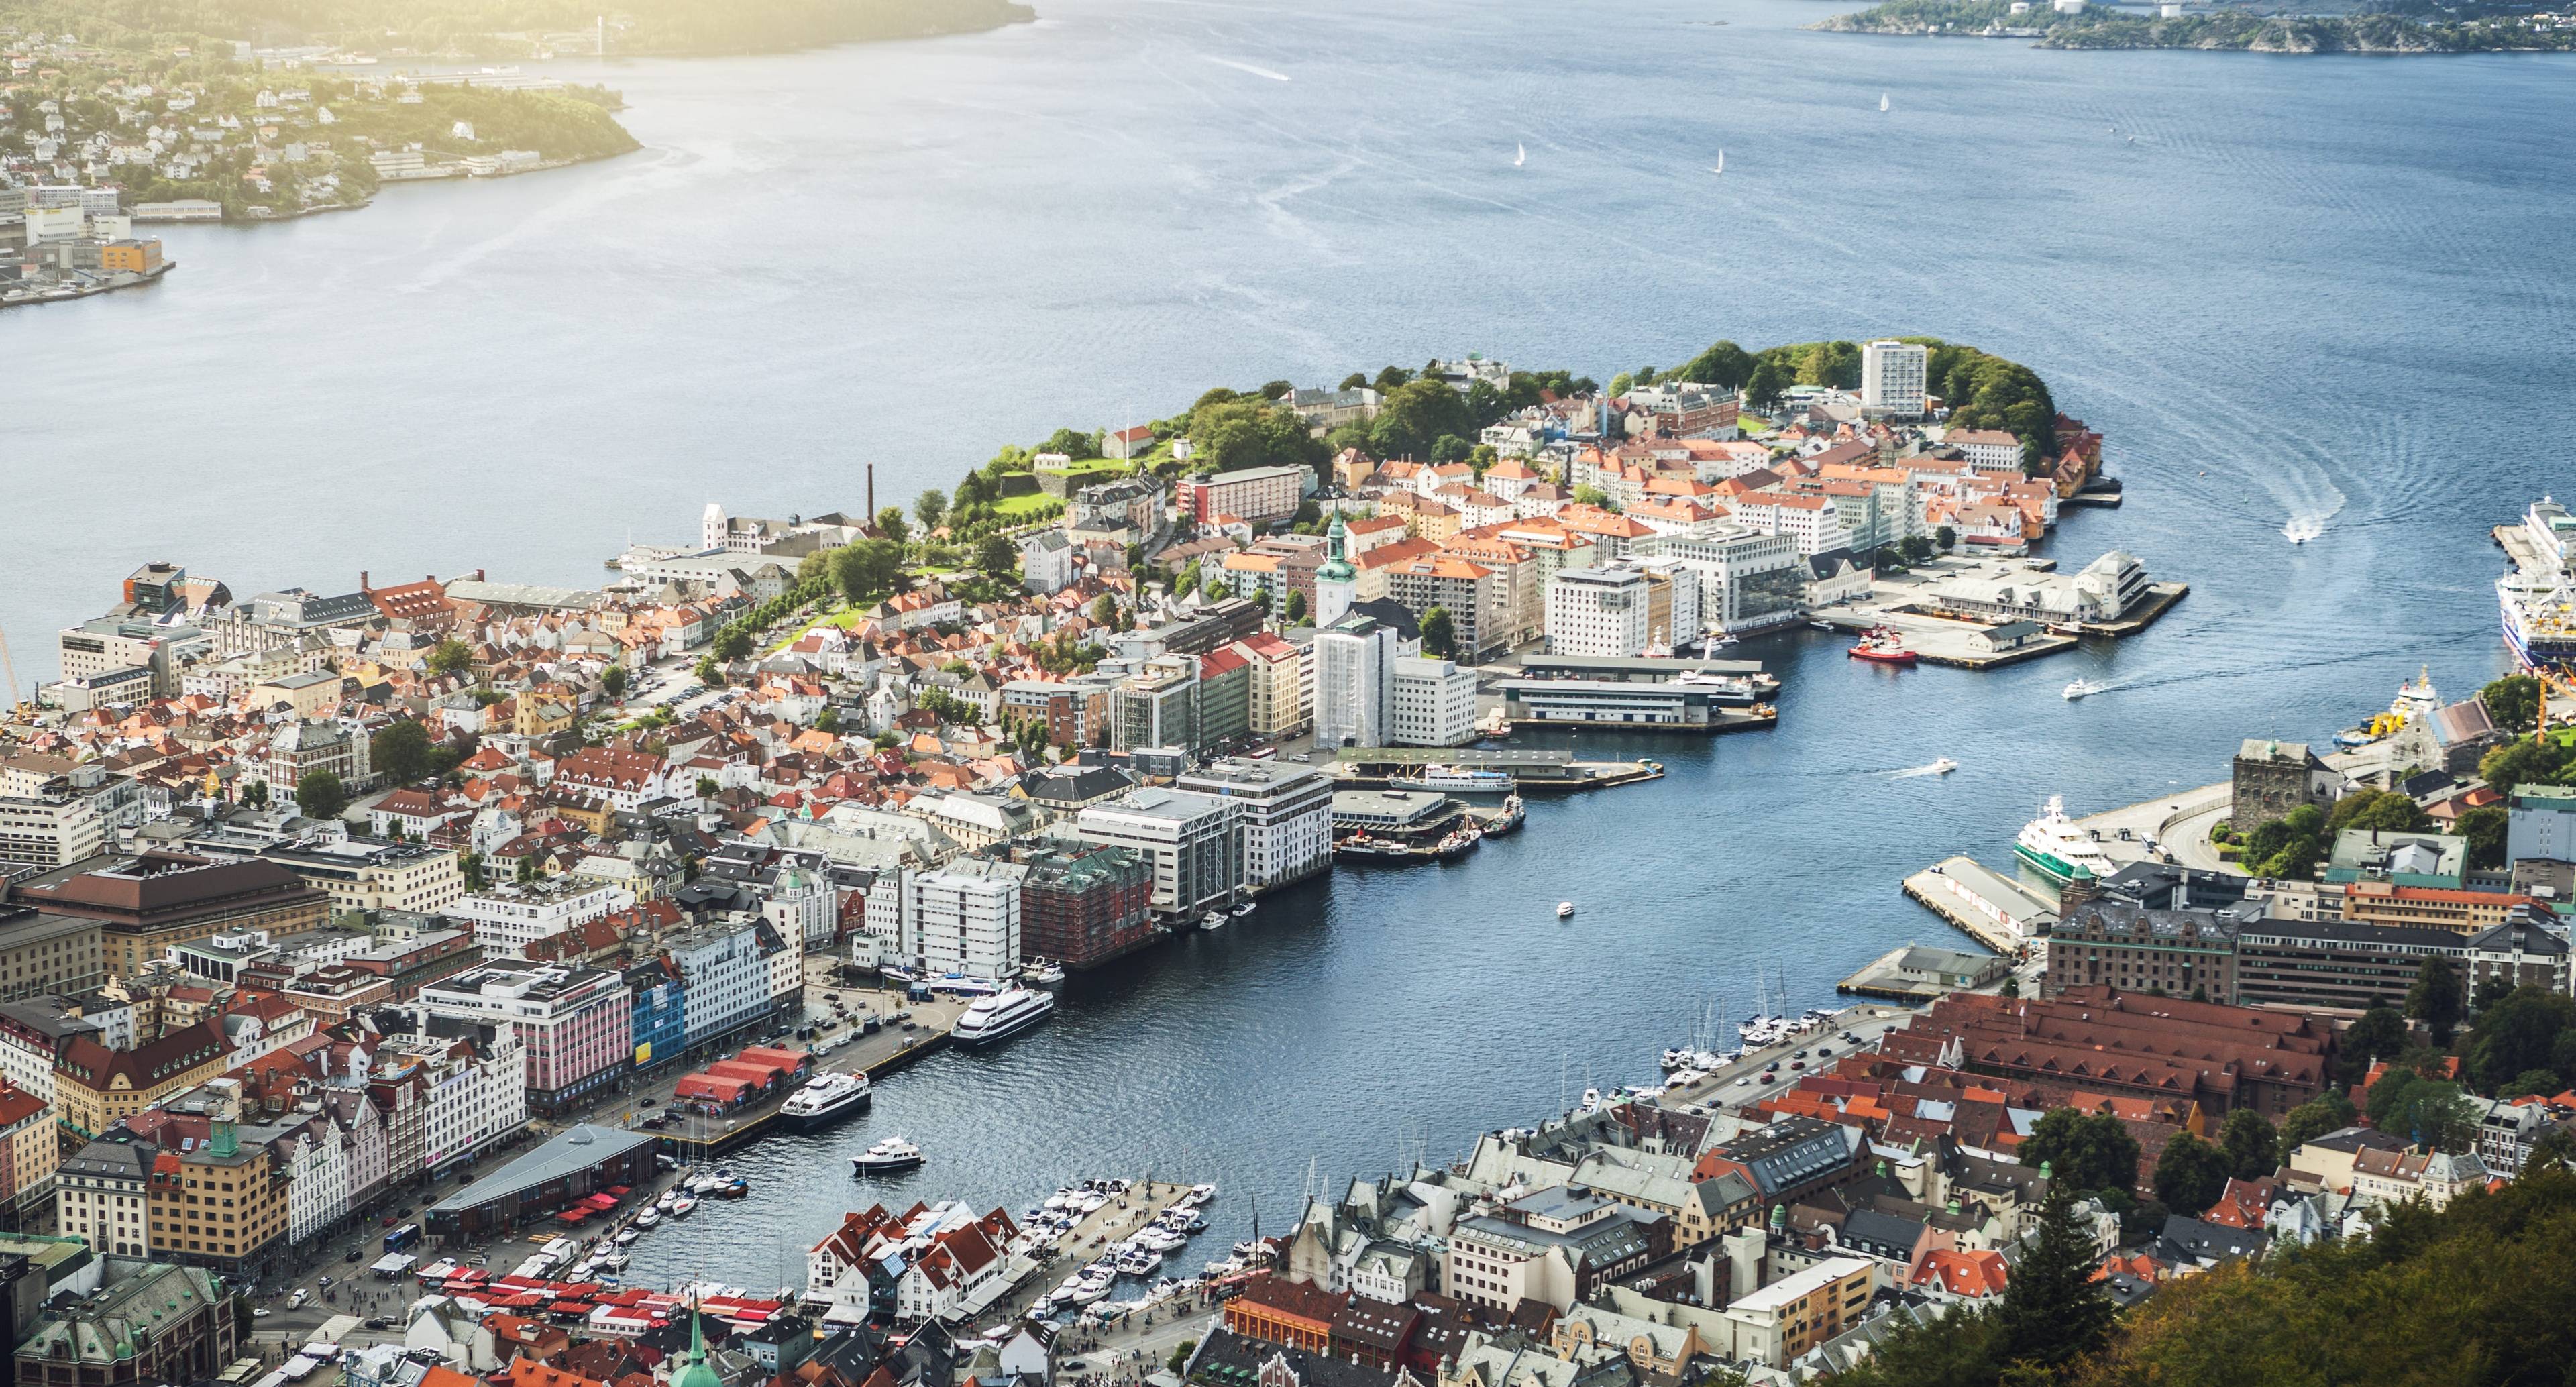 Discover the Wonderful Mountains Surrounding the City of Bergen as You Embark on This Adventure Along the Famous Coast of Norway